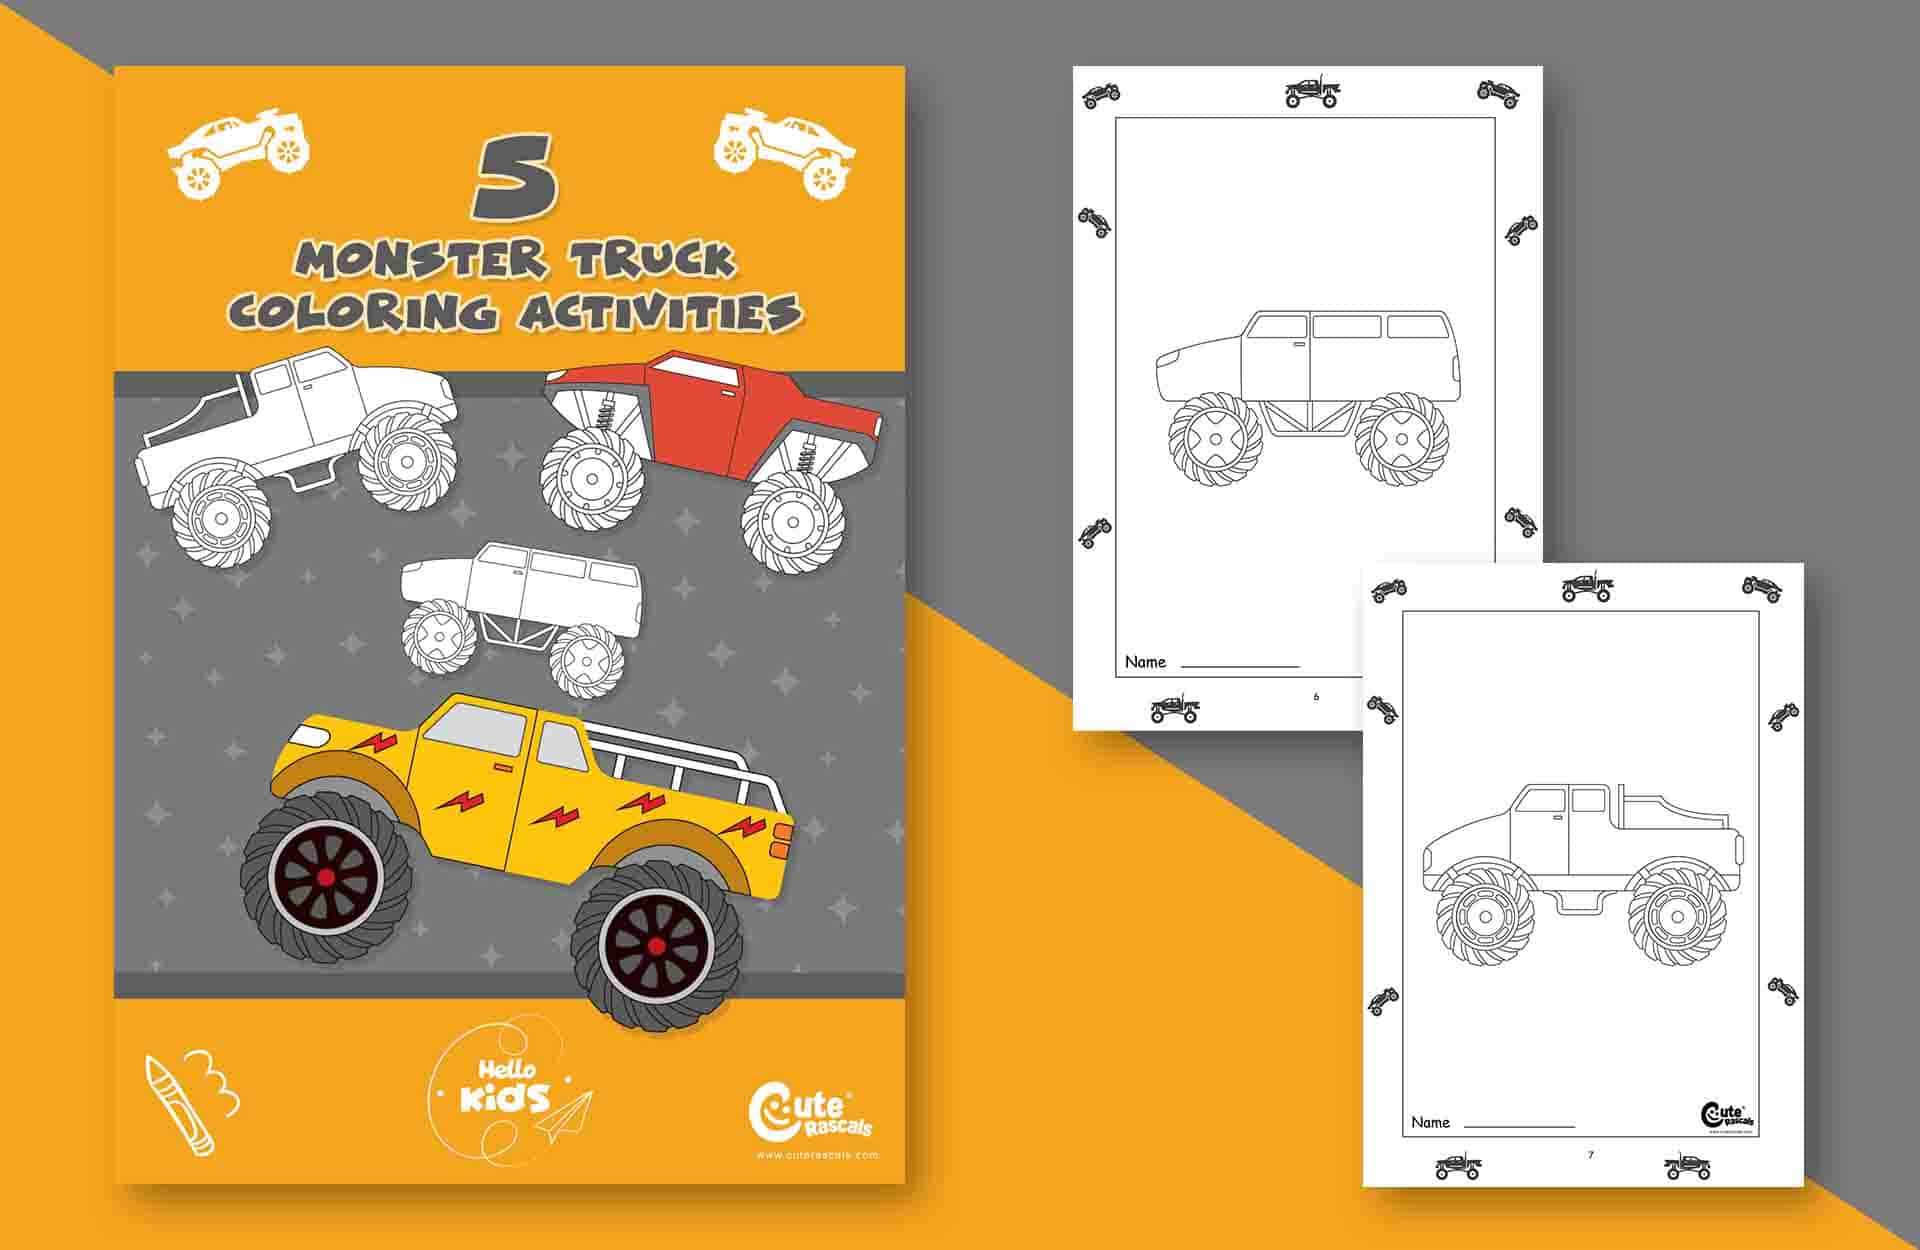 5 Big Monster Truck Coloring Pages for Kids' Playtime